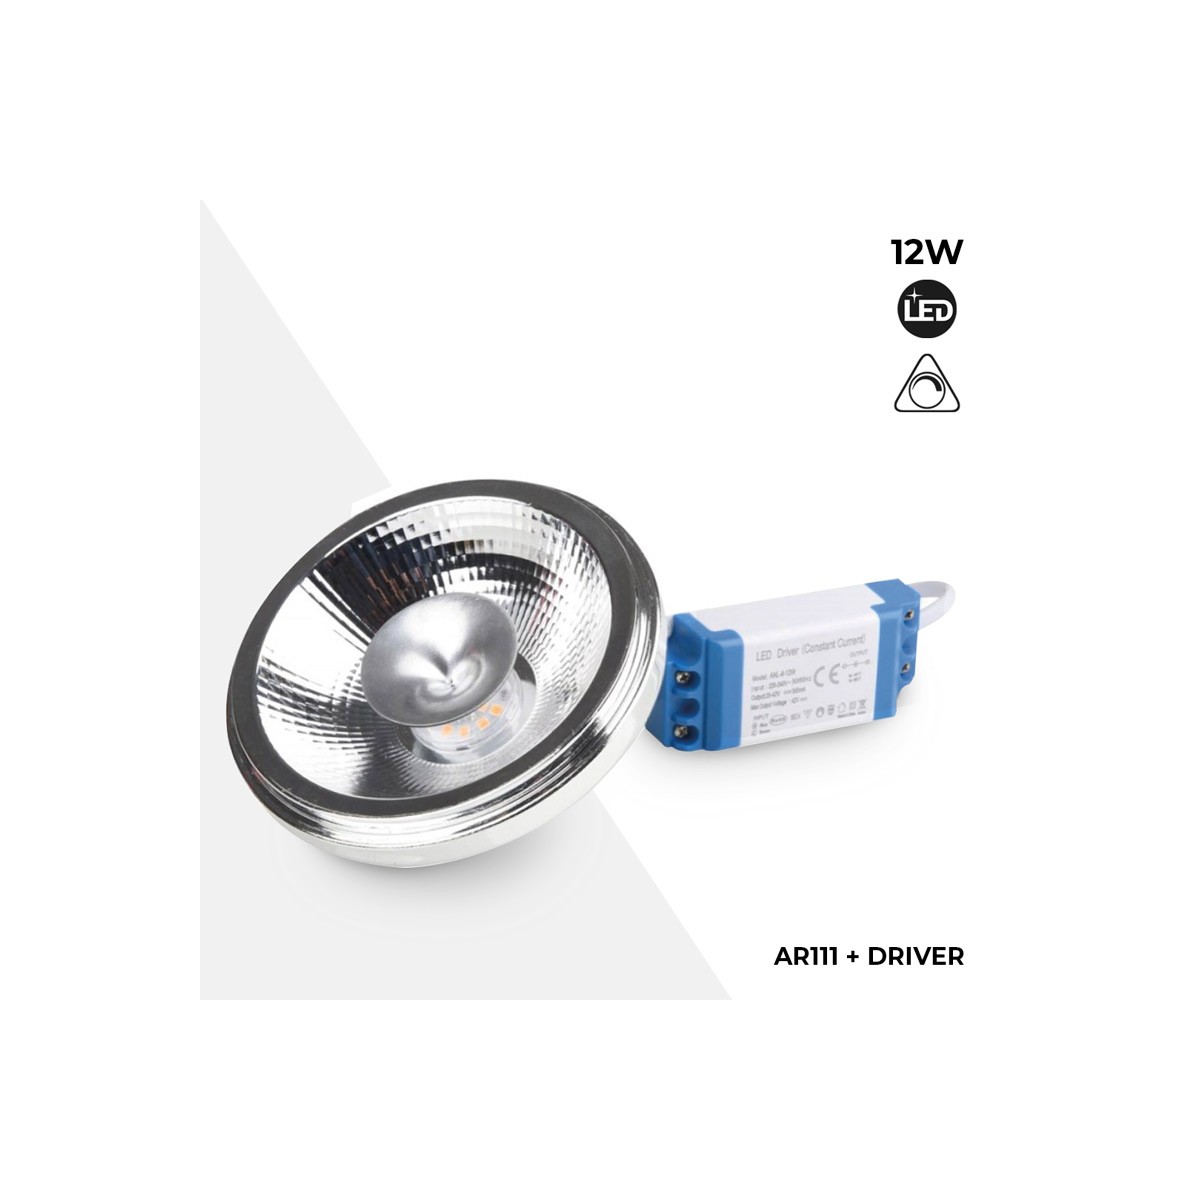 LED Bulb AR111 12W Dimmable with External Driver Angle 12°.